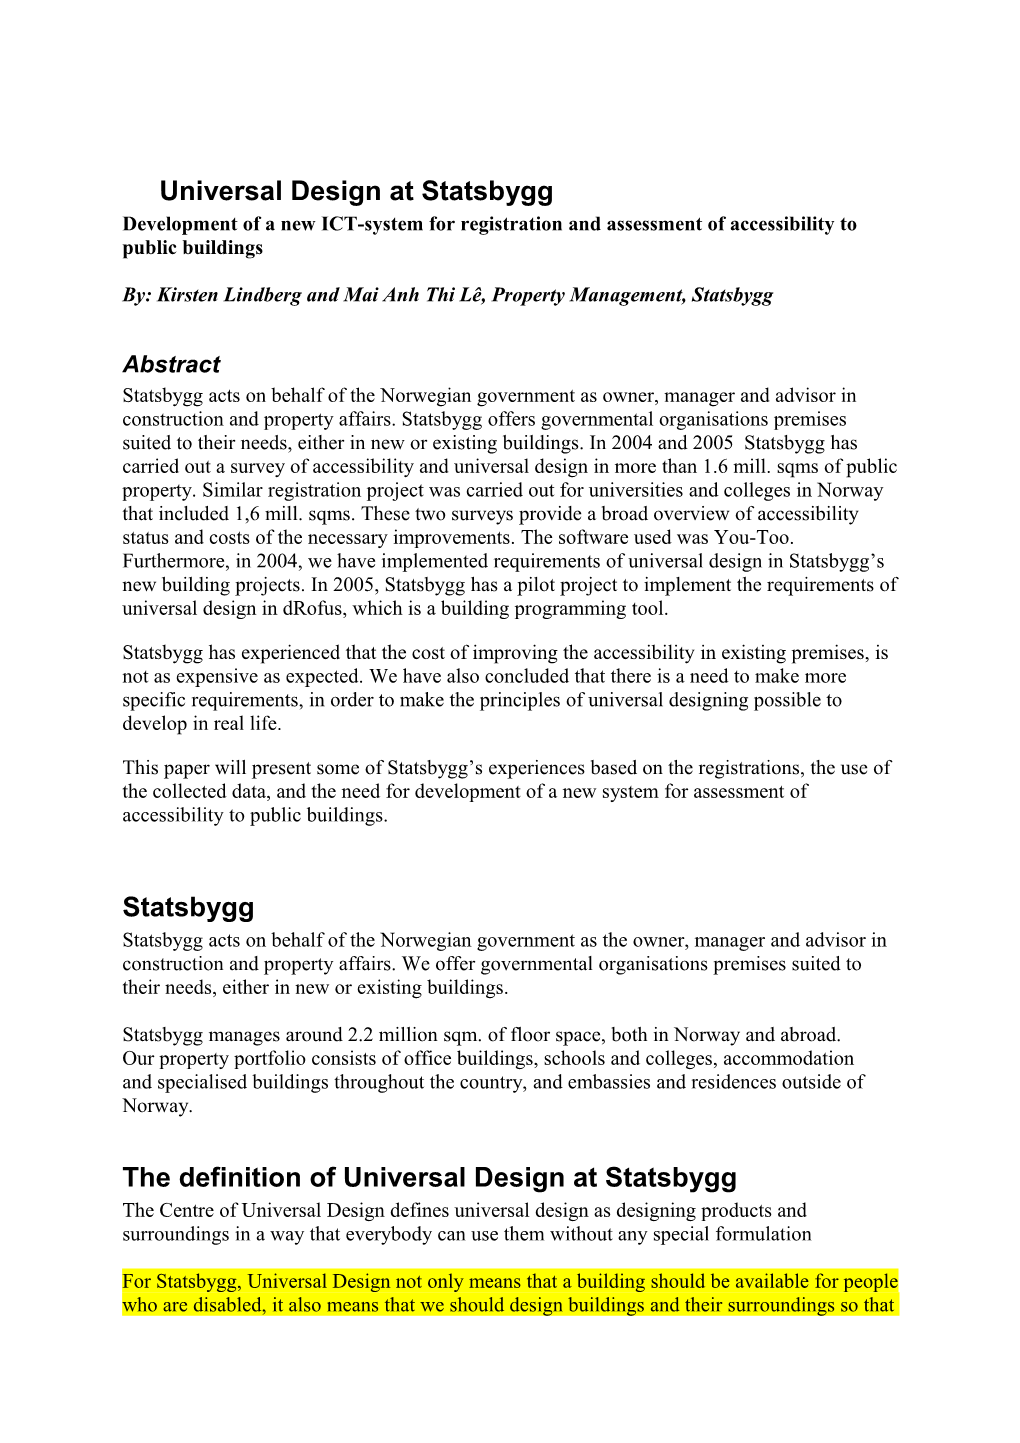 Universal Building Design and Decision Support Systems at the Directorat of Public Construction